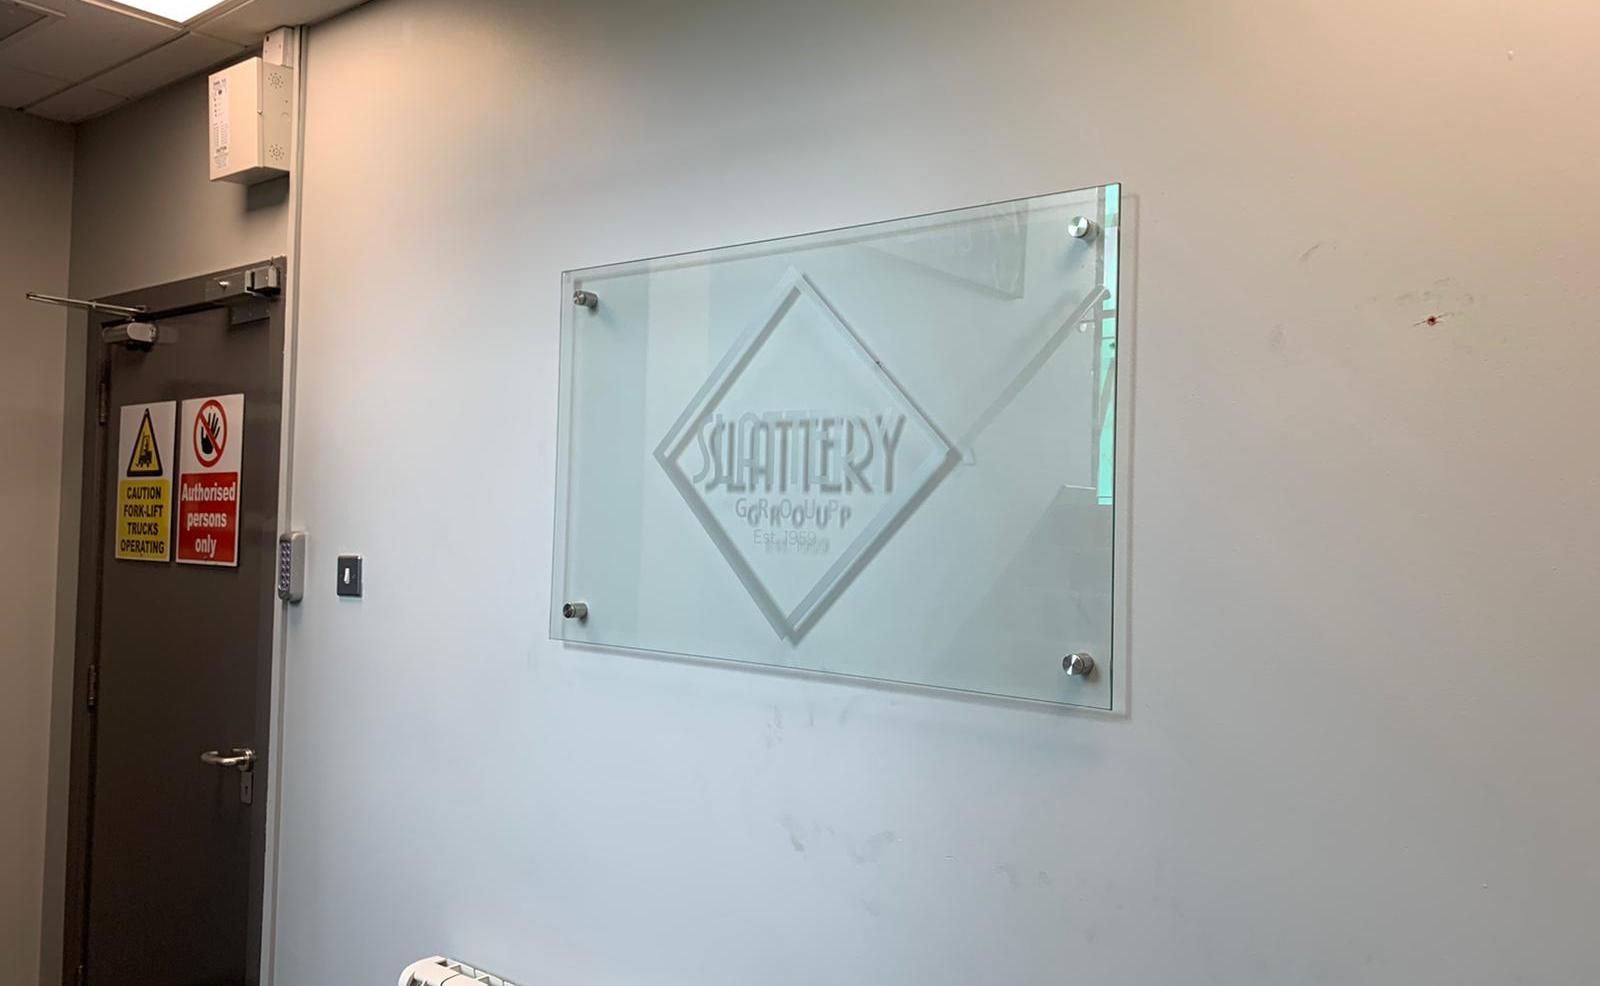 Internal perspex wall sign for the Slattery Groups